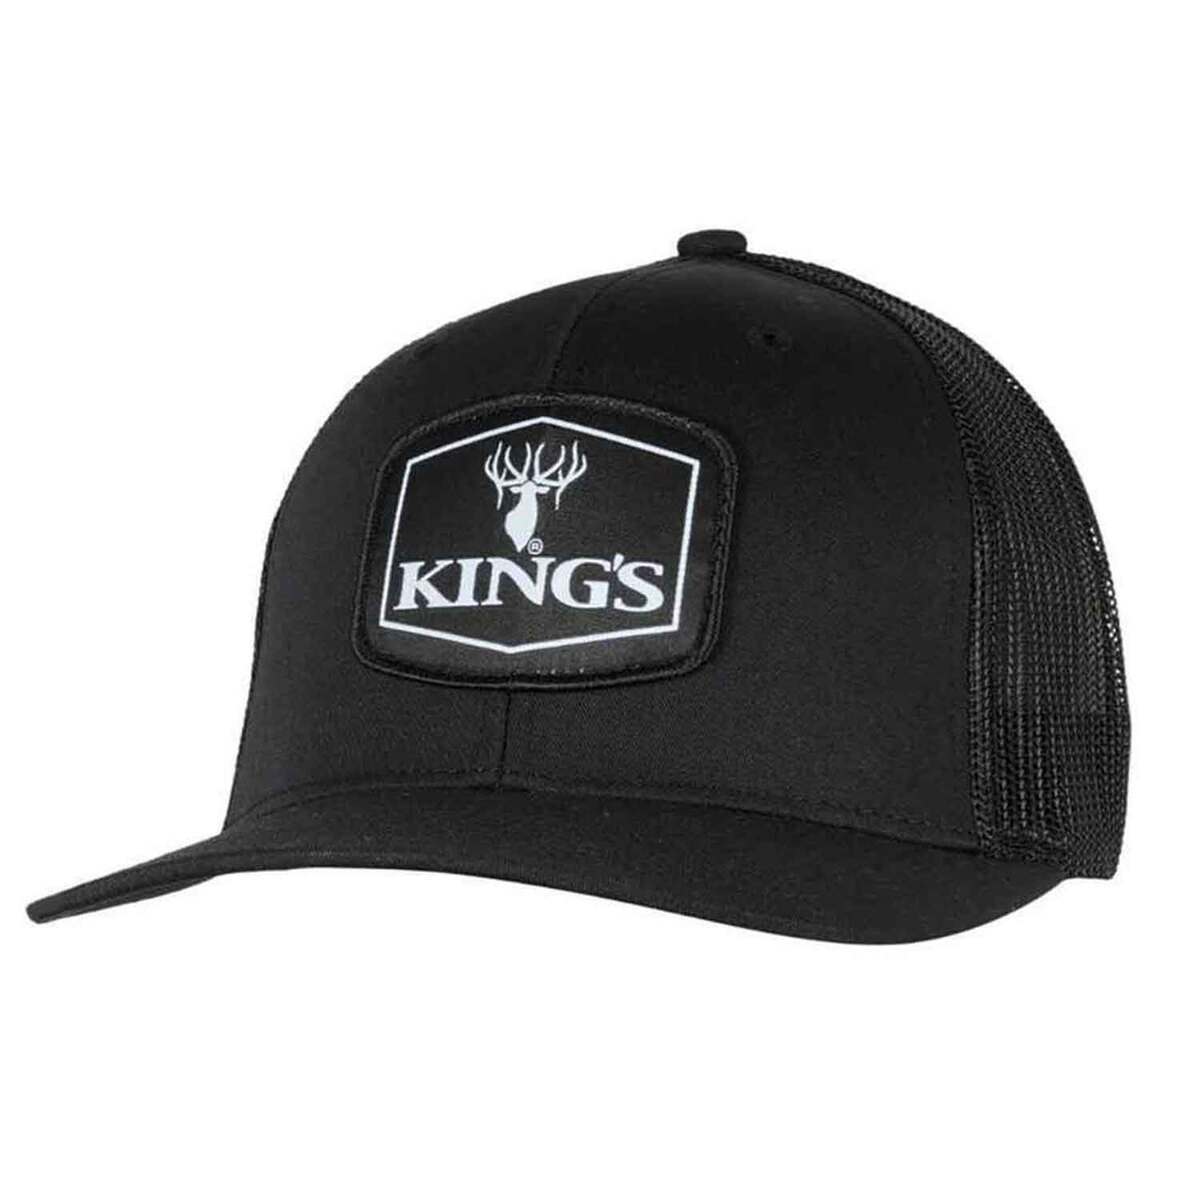 King's Camo Hunter Series Embroidered Mesh Hat